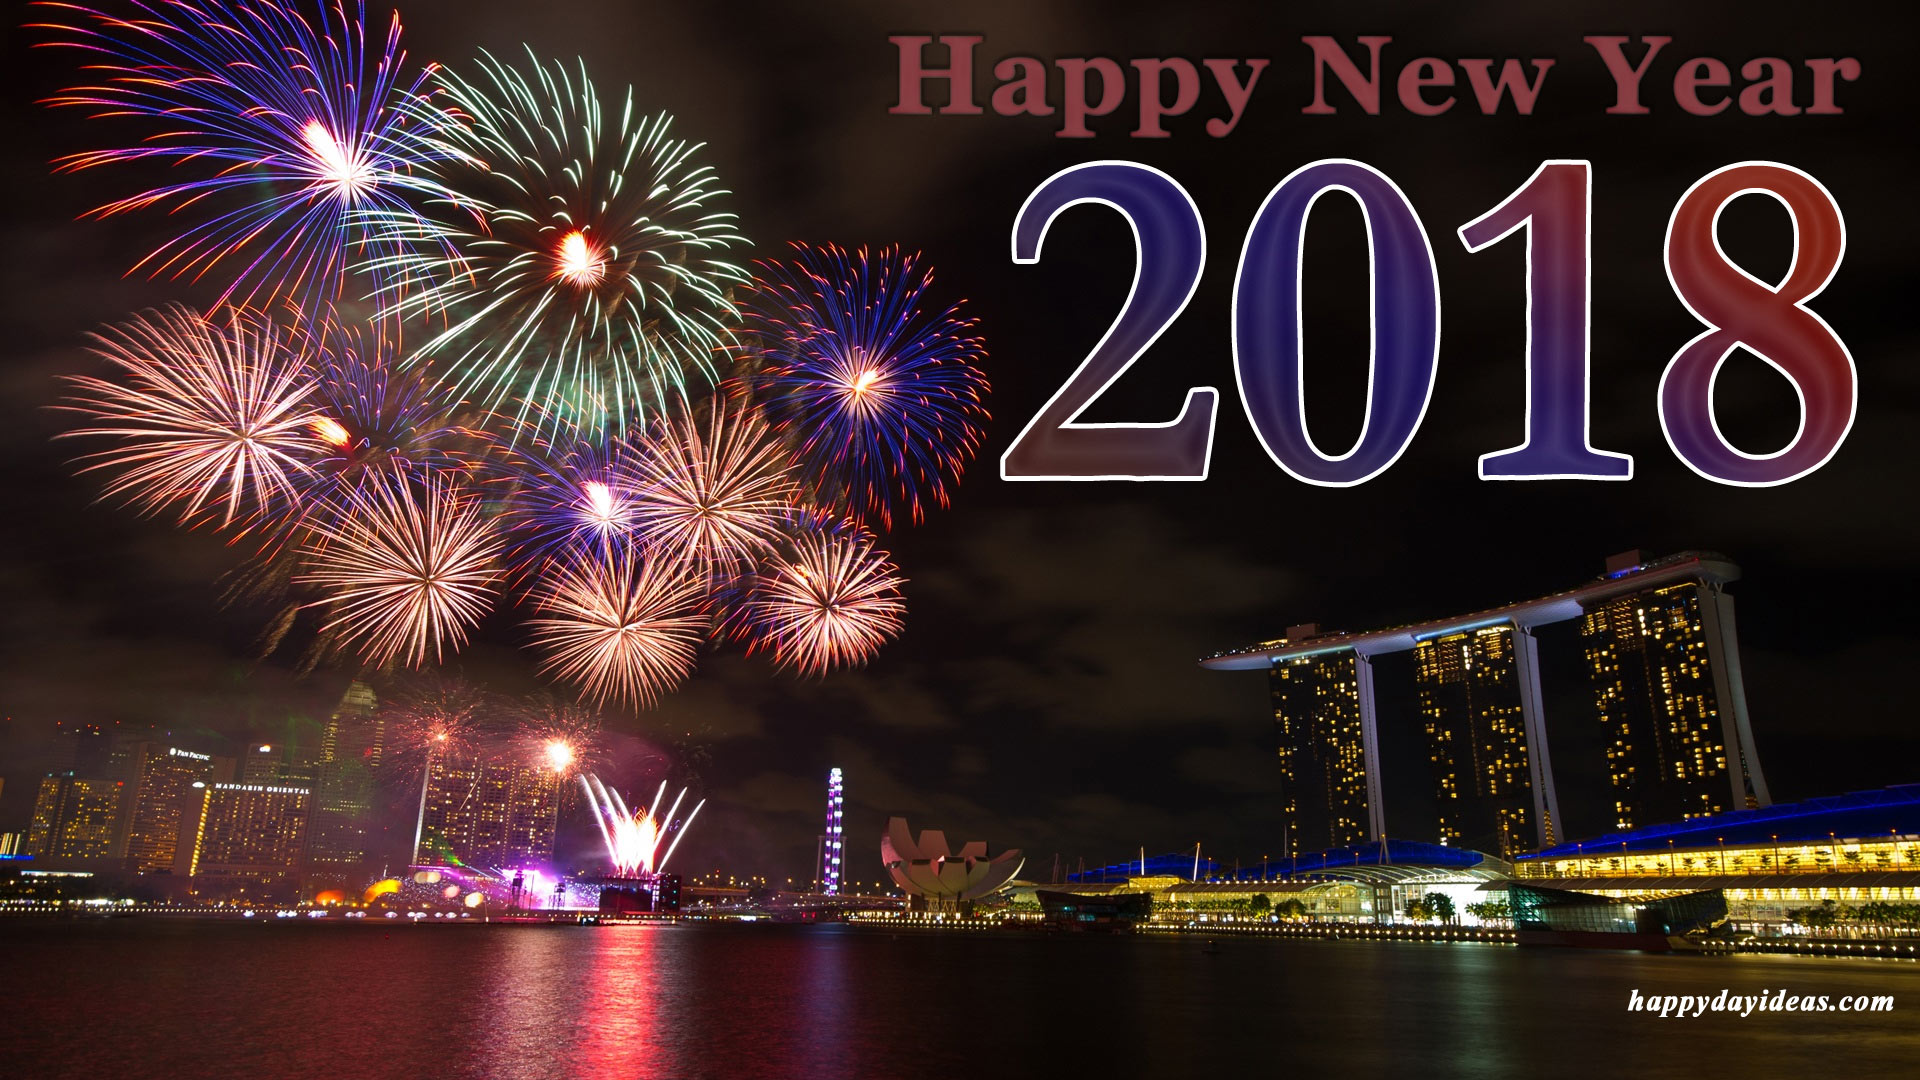 Happy New Year 2018 wallpaper download in HD